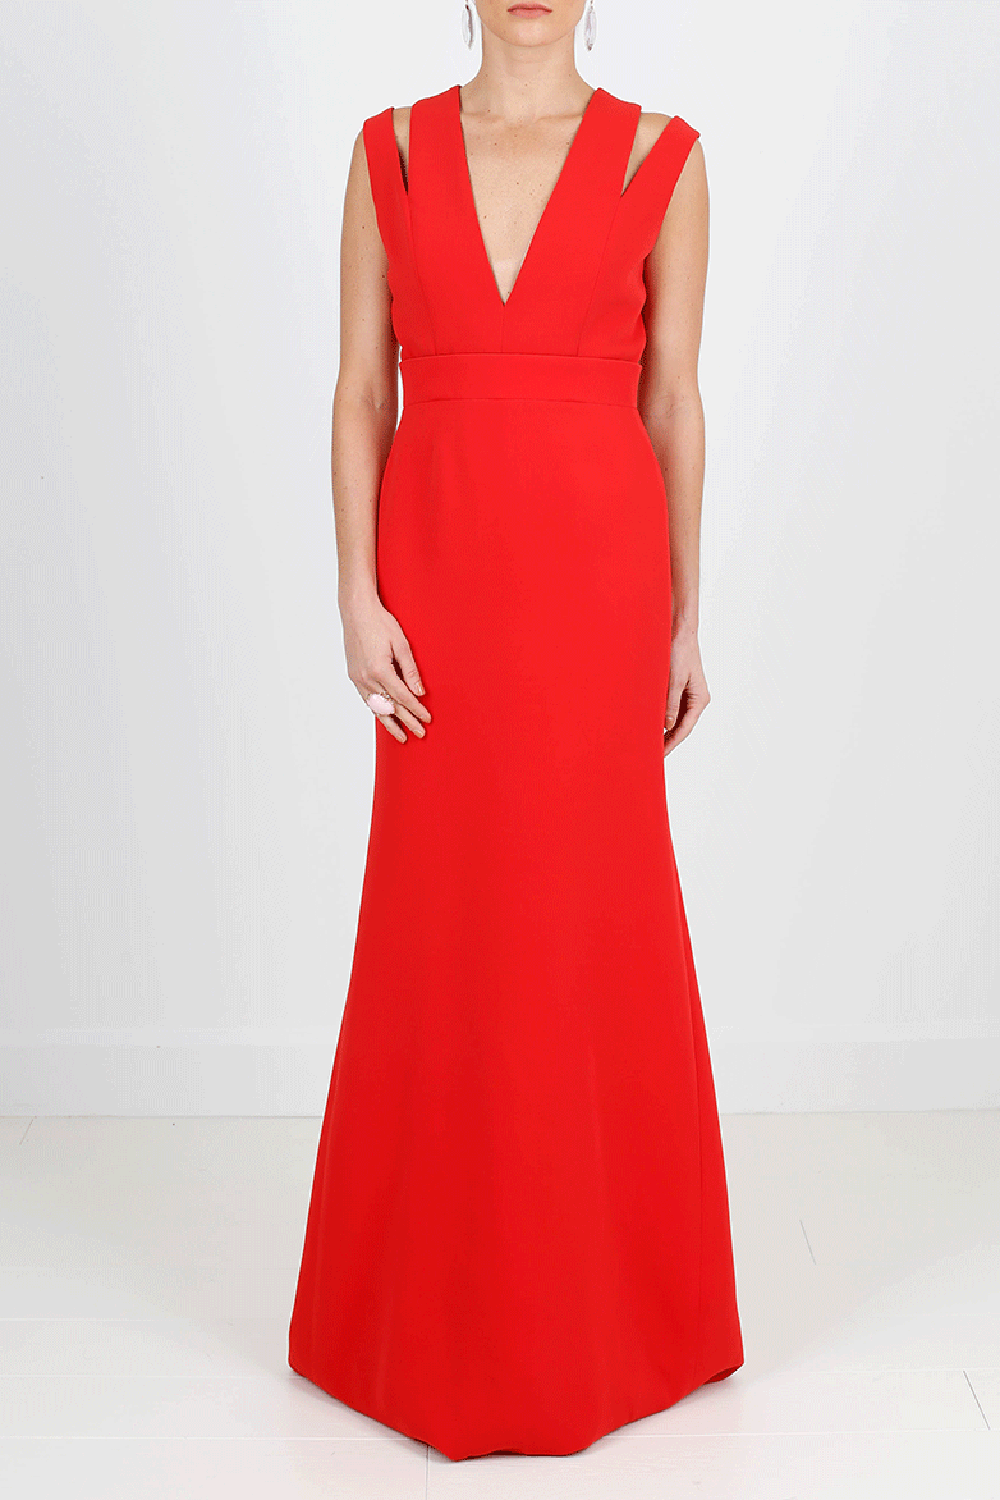 VICTORIA BECKHAM-Cut-Out Gown-RED